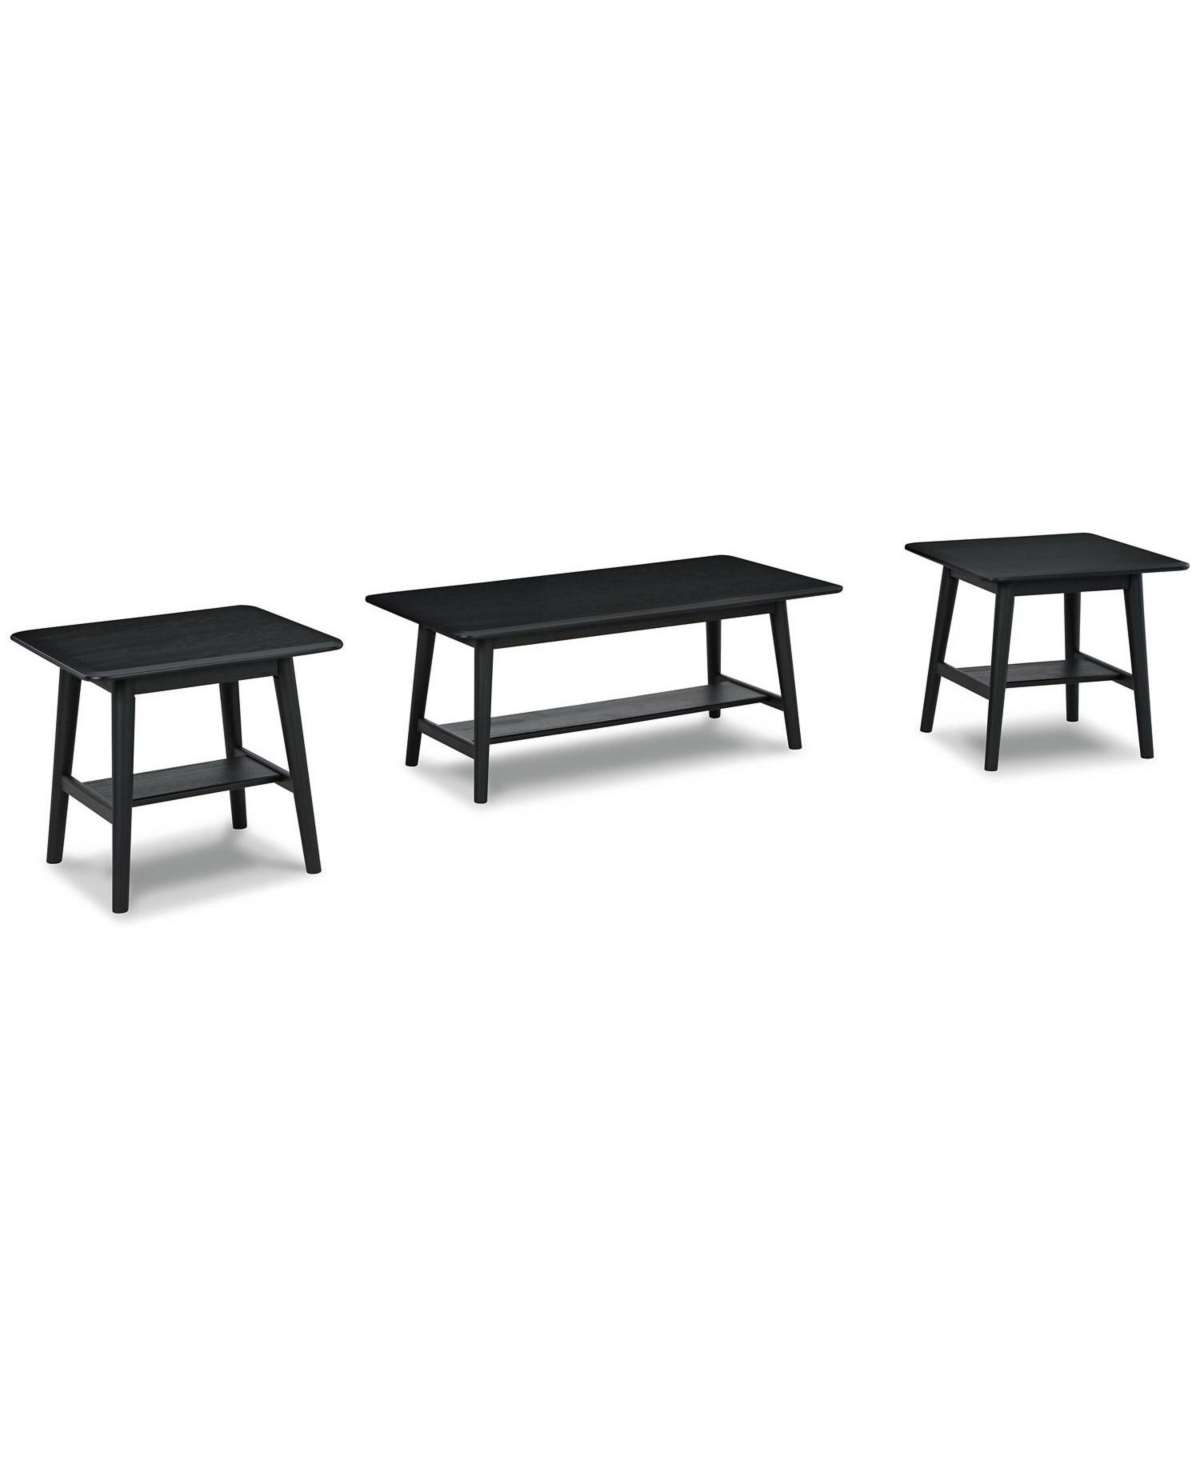 Signature Design By Ashley Westmoro Occasional Table, Set Of 3 In Black